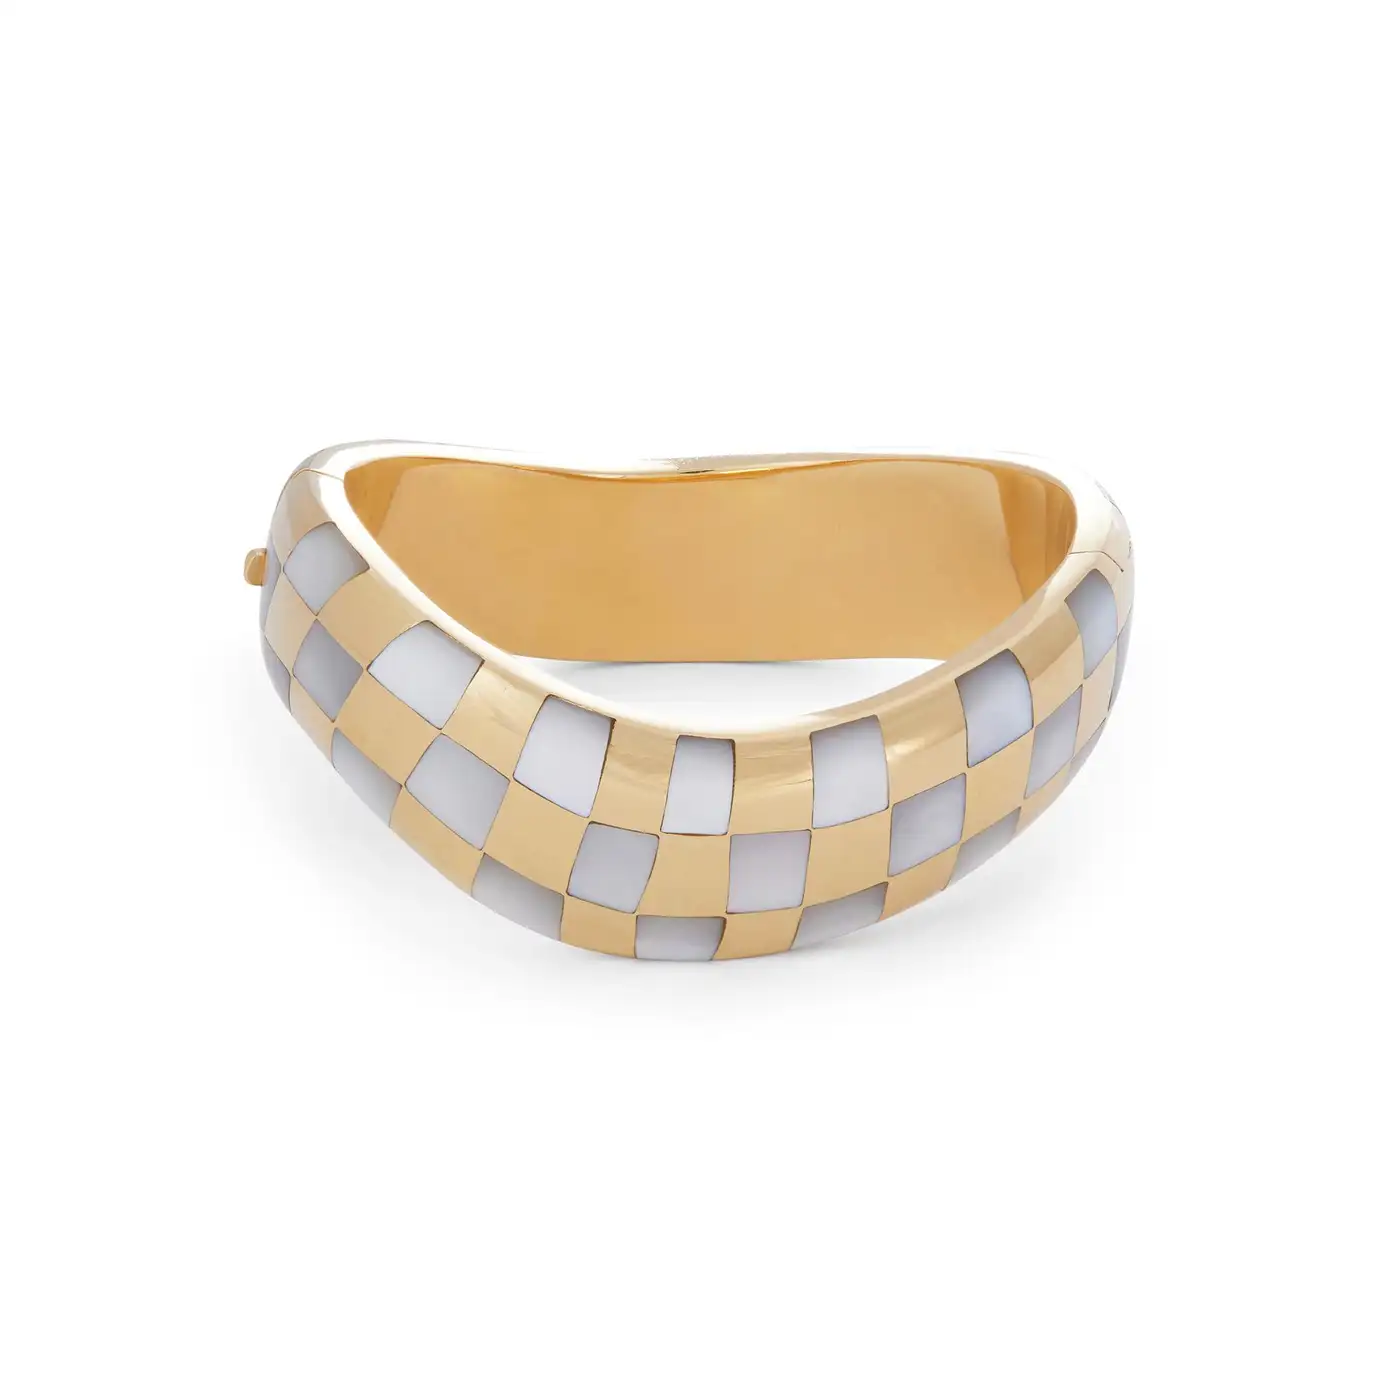 Angela-Cummings-Gold-and-Mother-or-Pearl-Bangle-8.webp